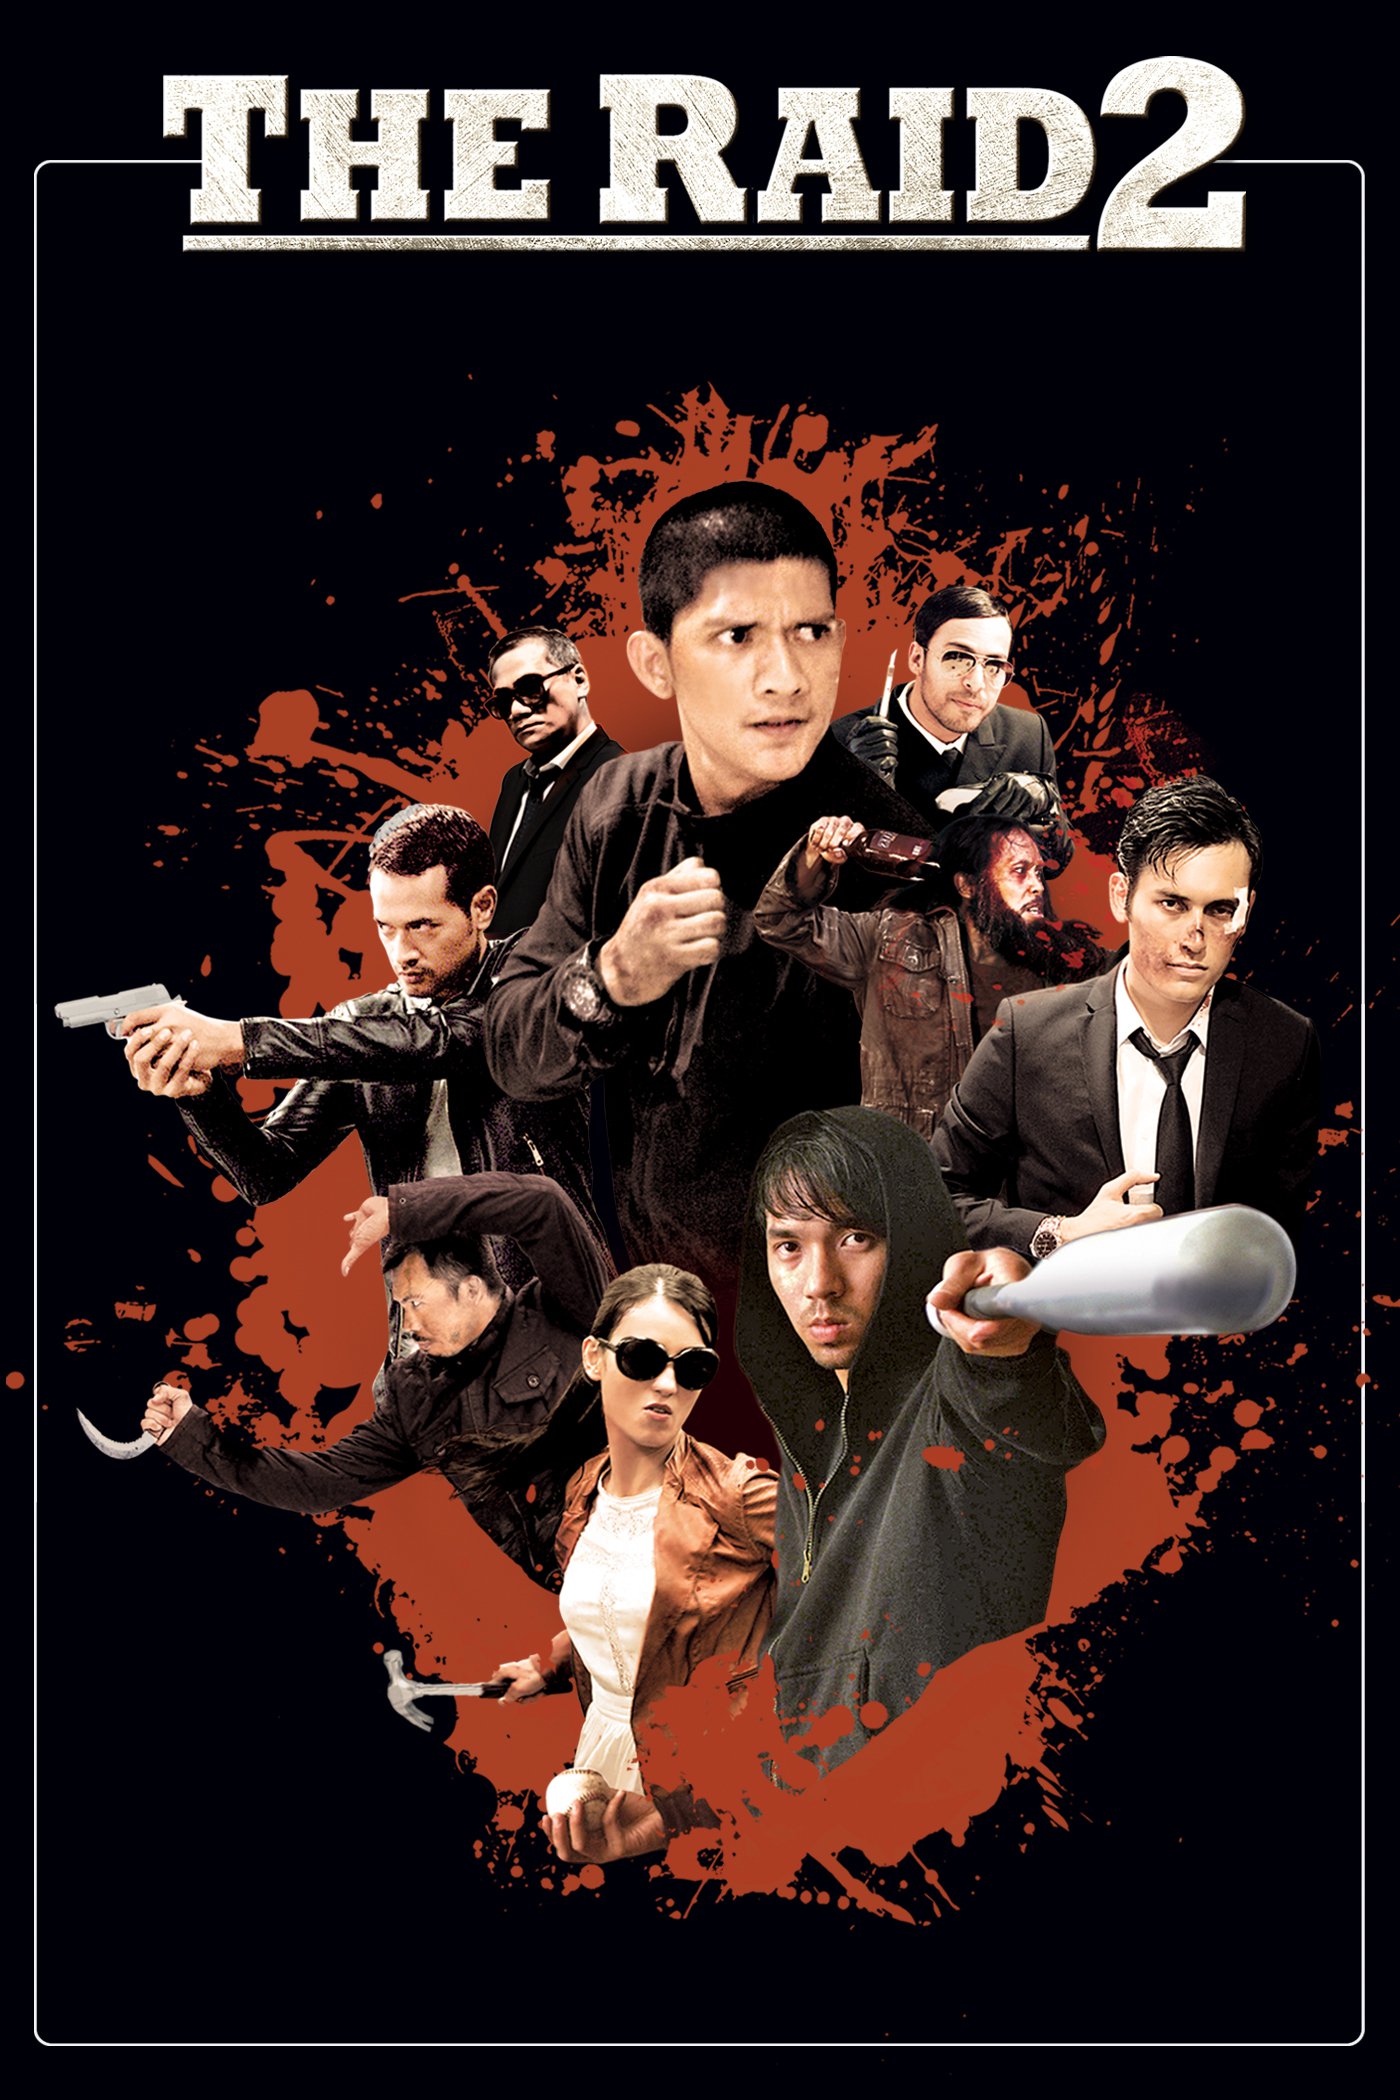 Poster for the movie "The Raid 2"